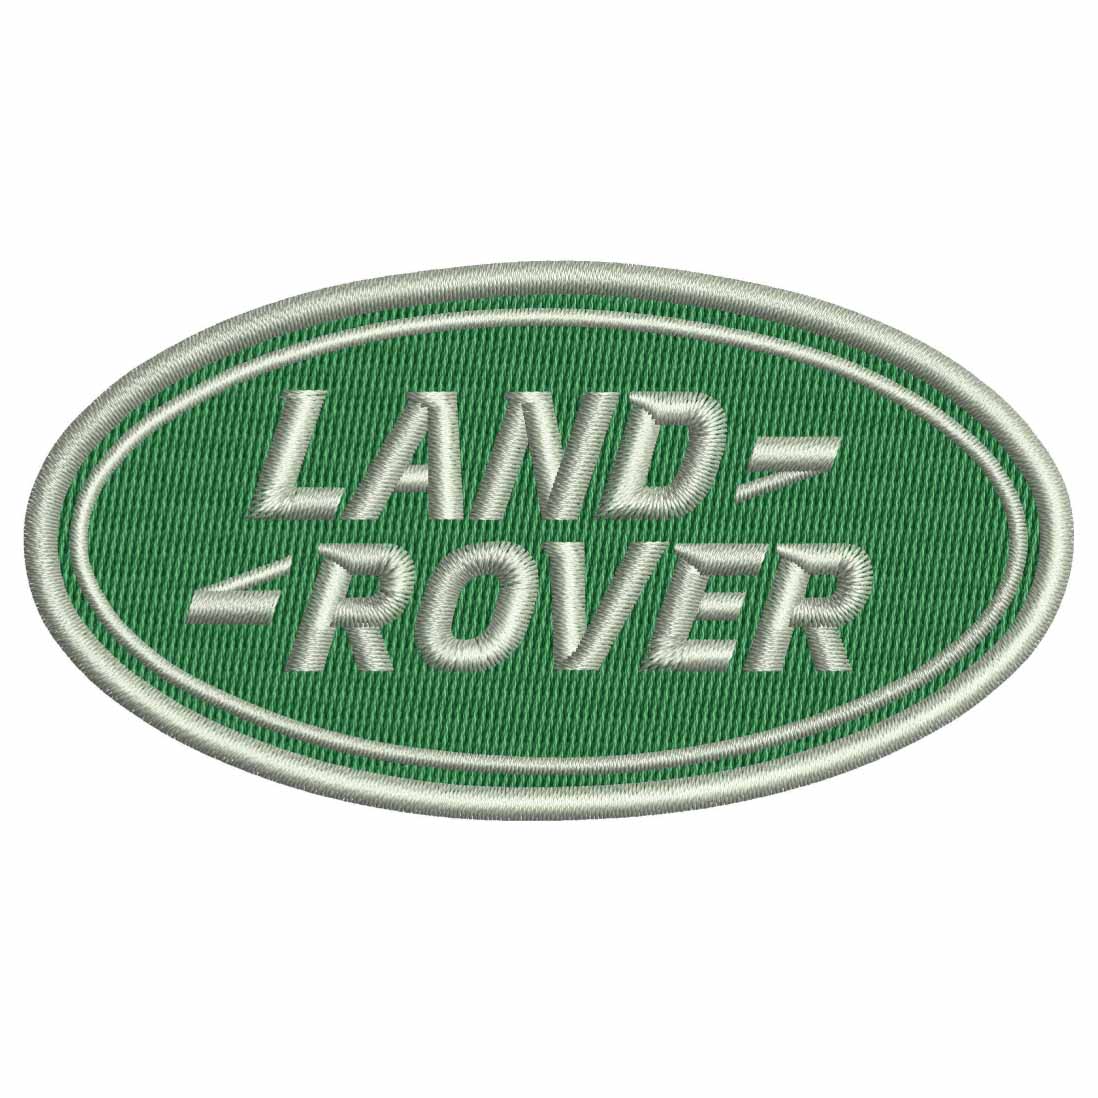 LAND ROVER 3-5 INCH